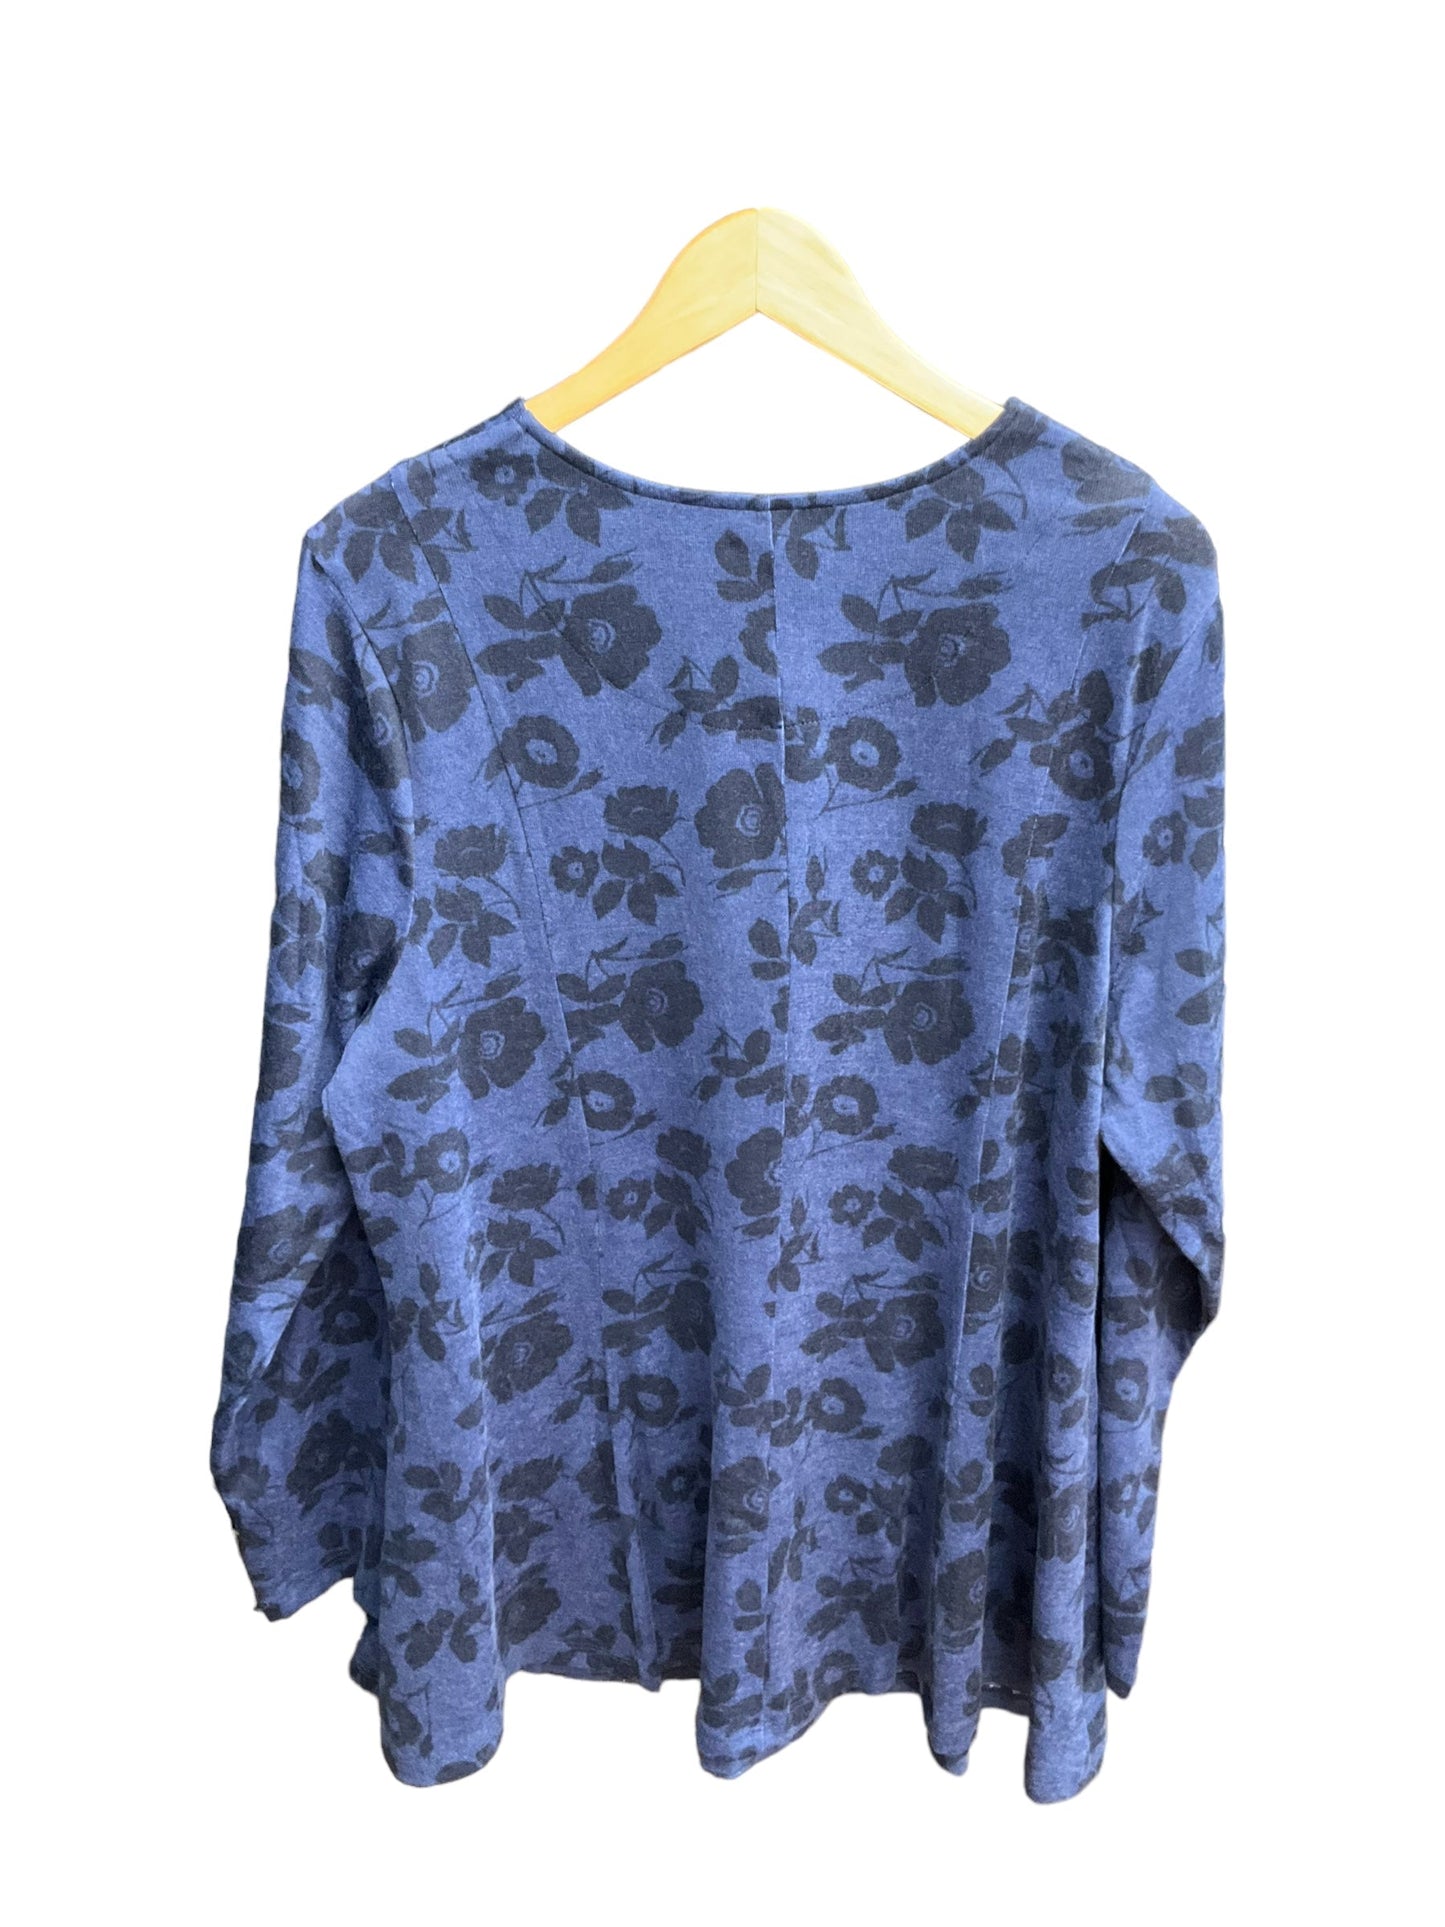 Floral Print Top Long Sleeve Denim And Company, Size Xl